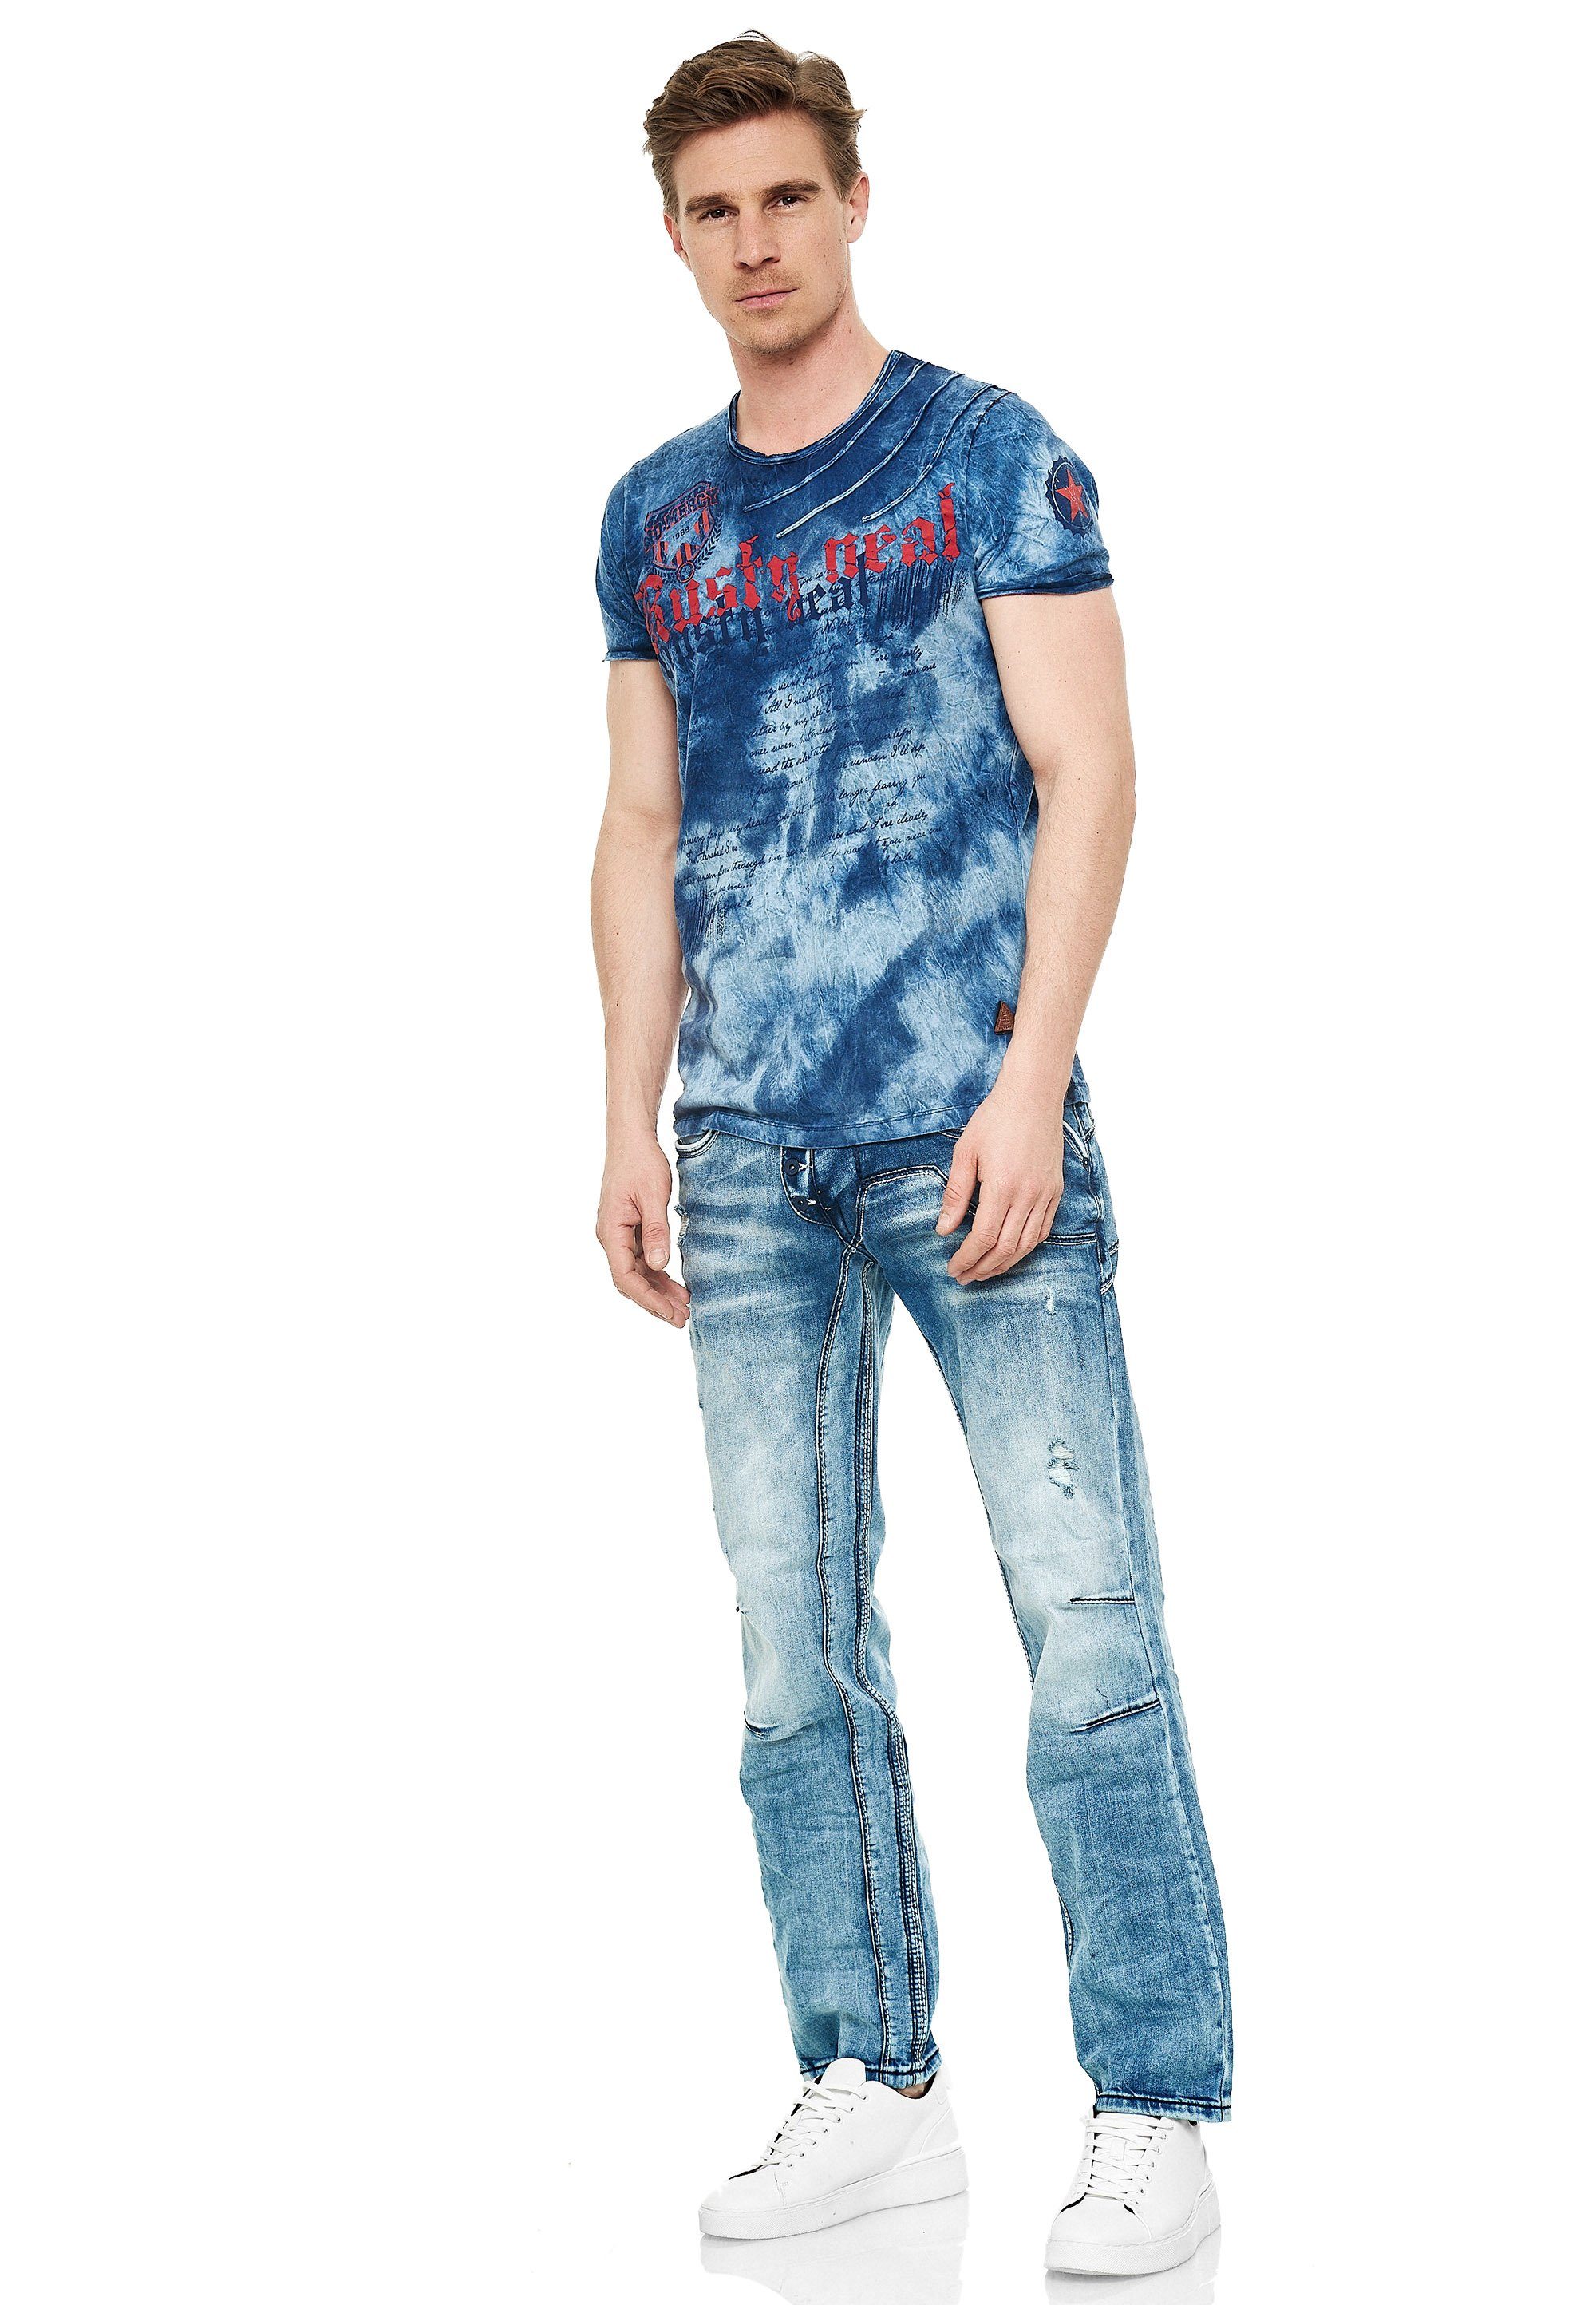 Jeans Rusty Neal Waschung cooler Bequeme mit